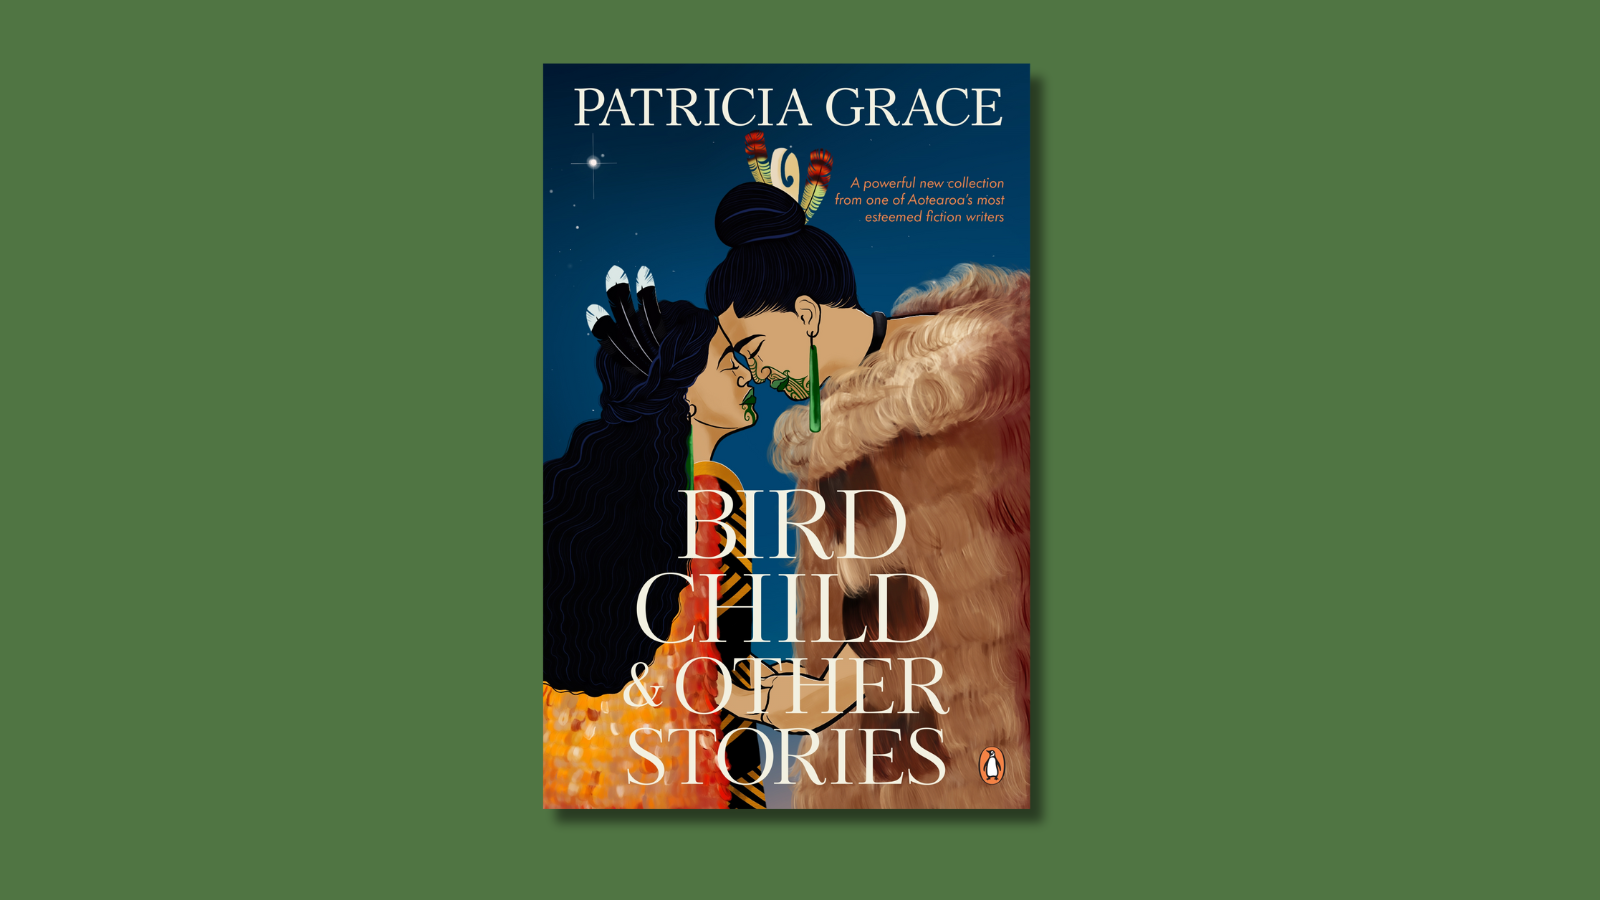 Bird Child and Other Stories by Patricia Grace